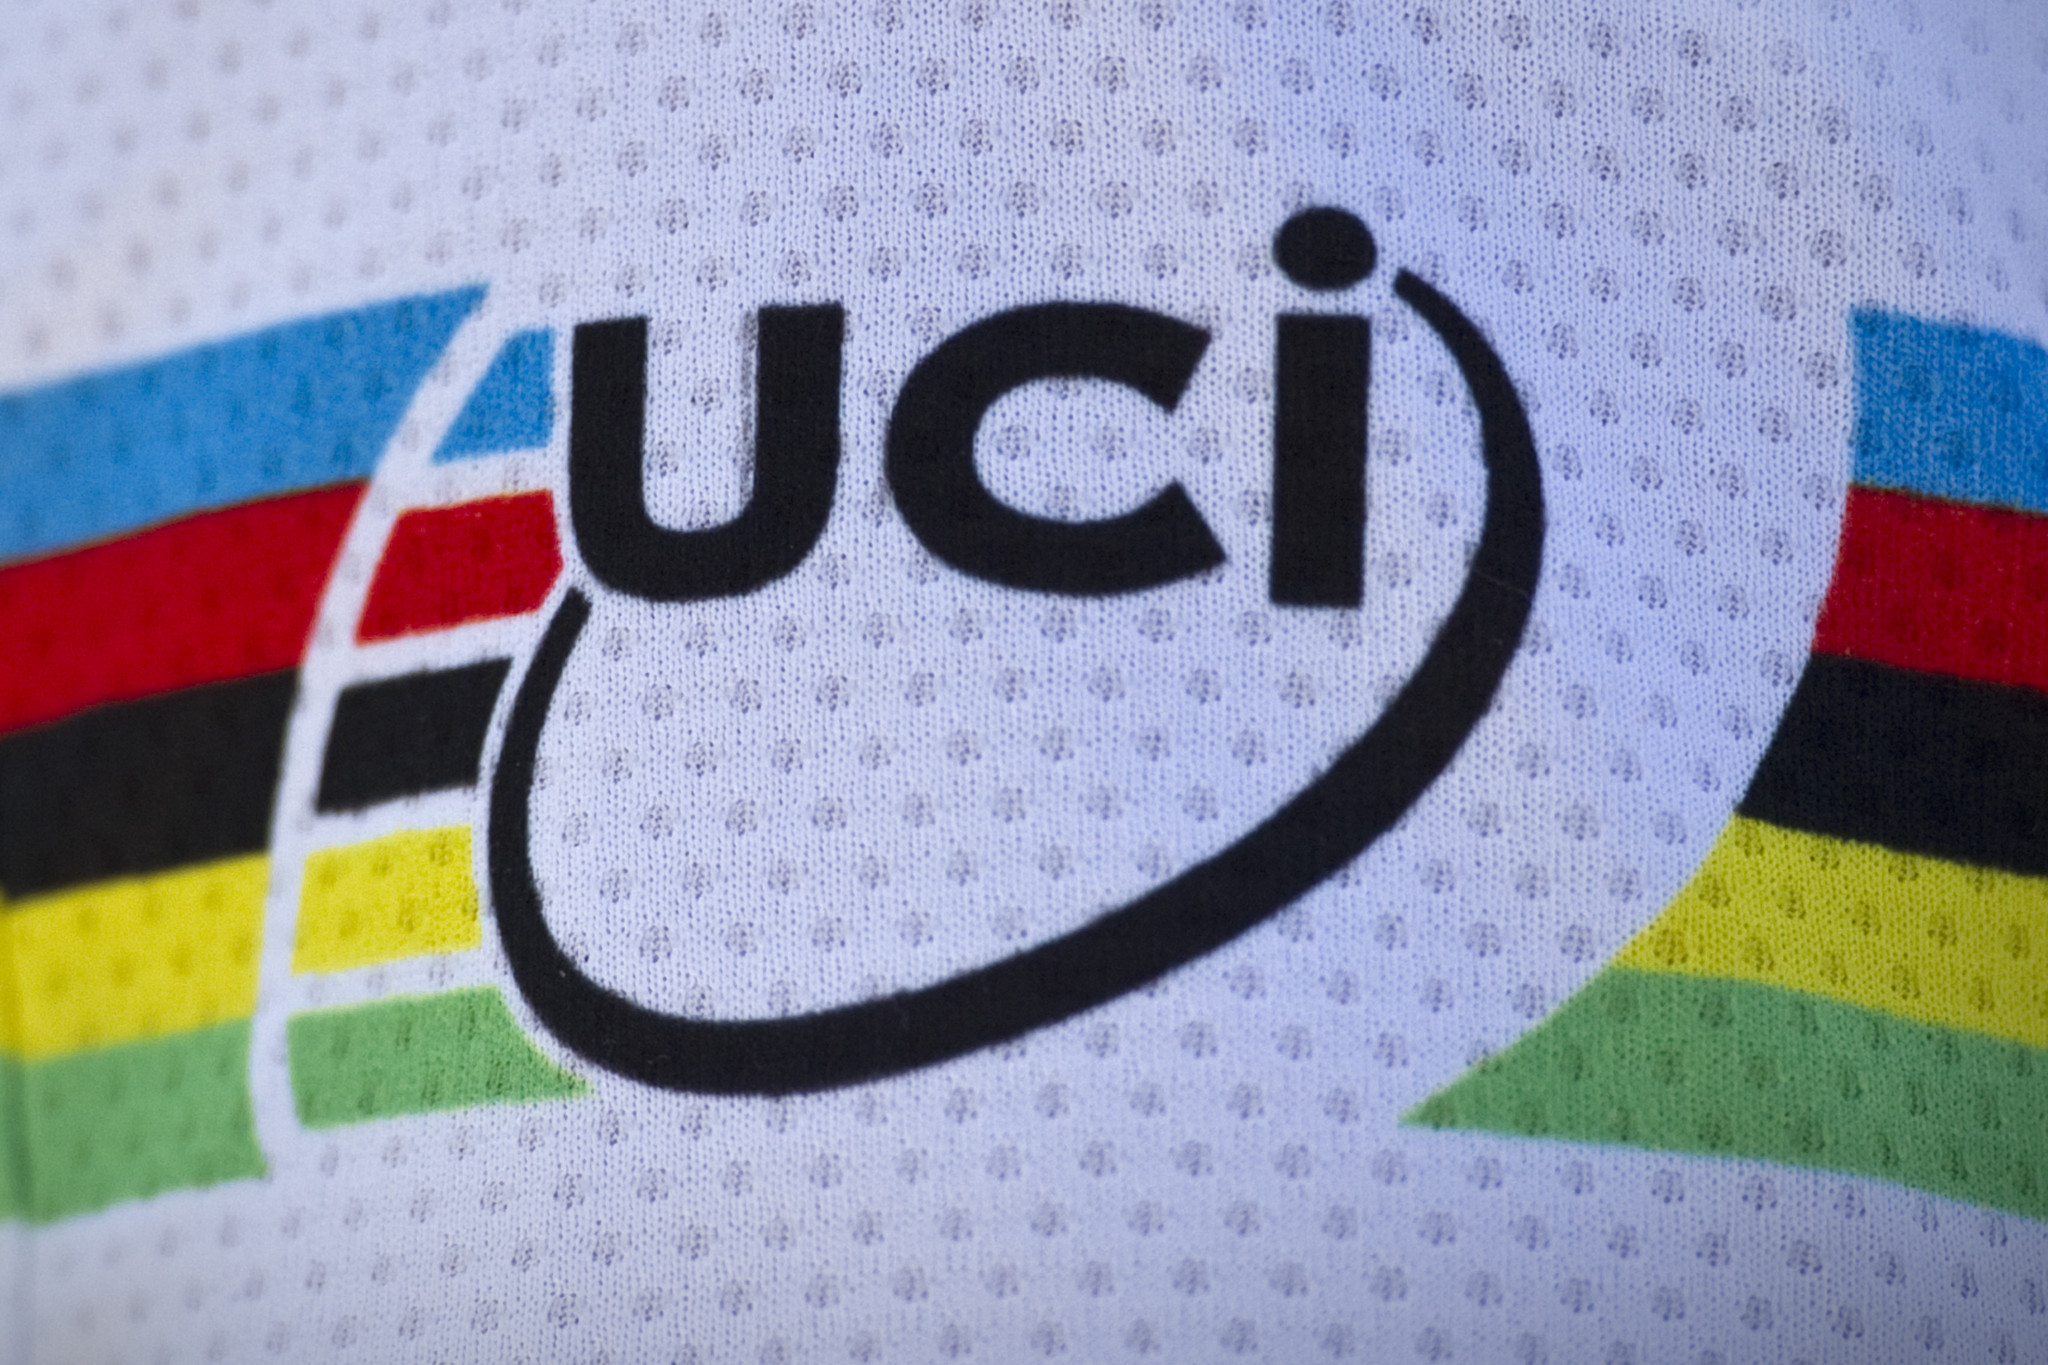 Mixed team time trial to feature at 2019 UCI Road Cycling World Championships